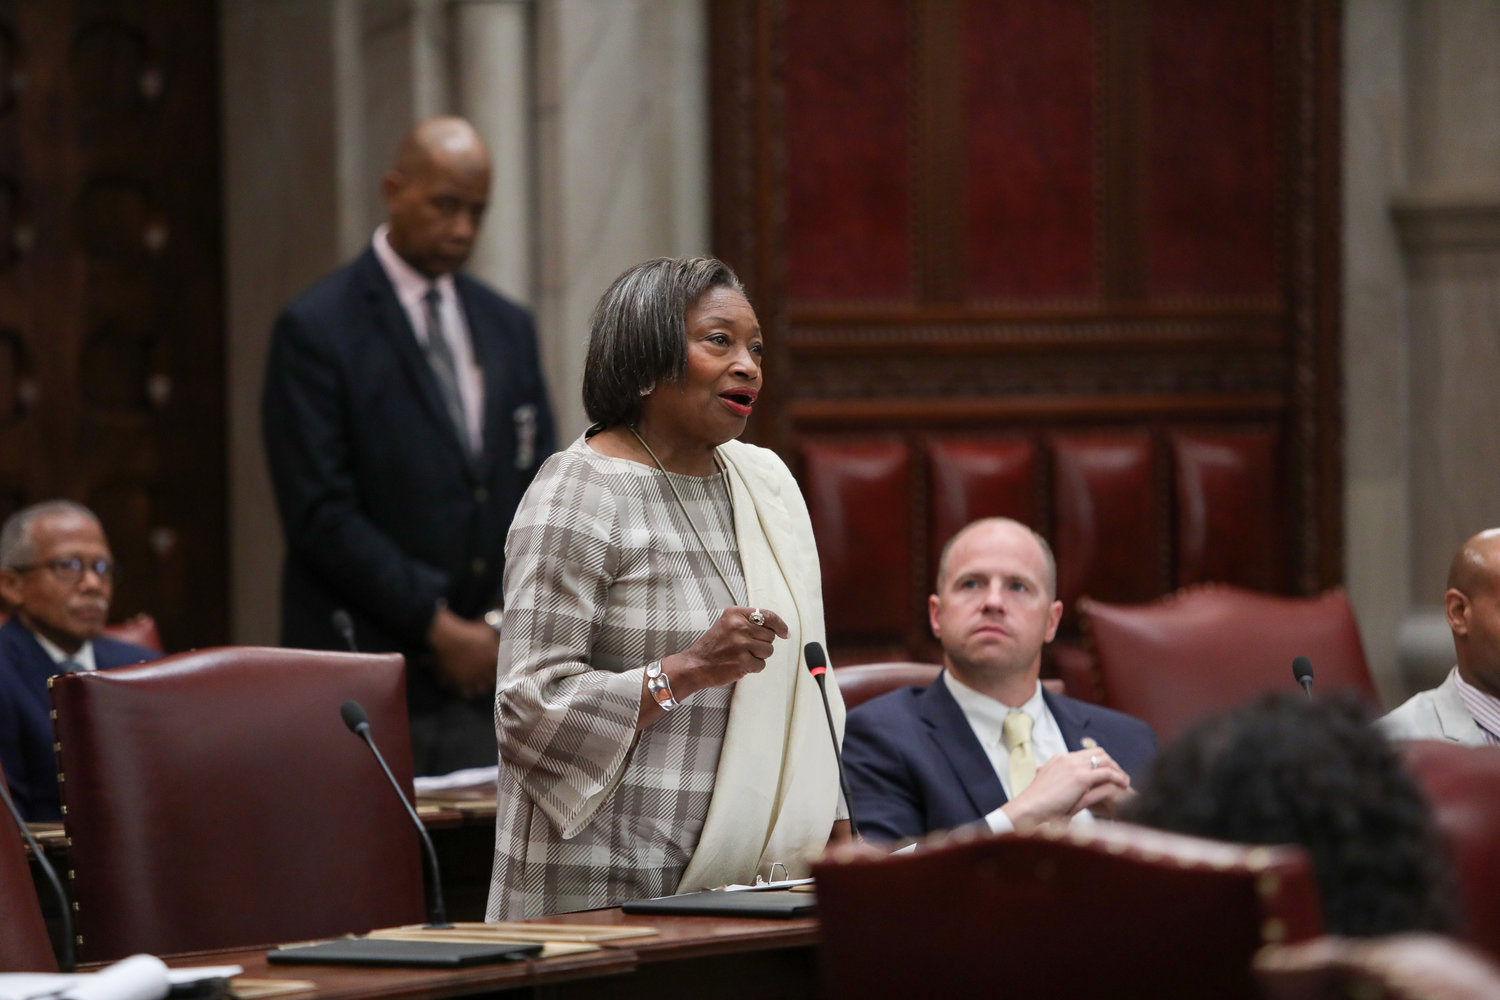 State Senate Majority Leader Andrea Stewart-Cousins, pictured addressing the chamber in July, said legislators’ tasks amount to a full-time job and deserved the pay increase they voted for themselves. If Governor Kathy Hochul signs the bill, state lawmakers would be the nation’s highest-paid.